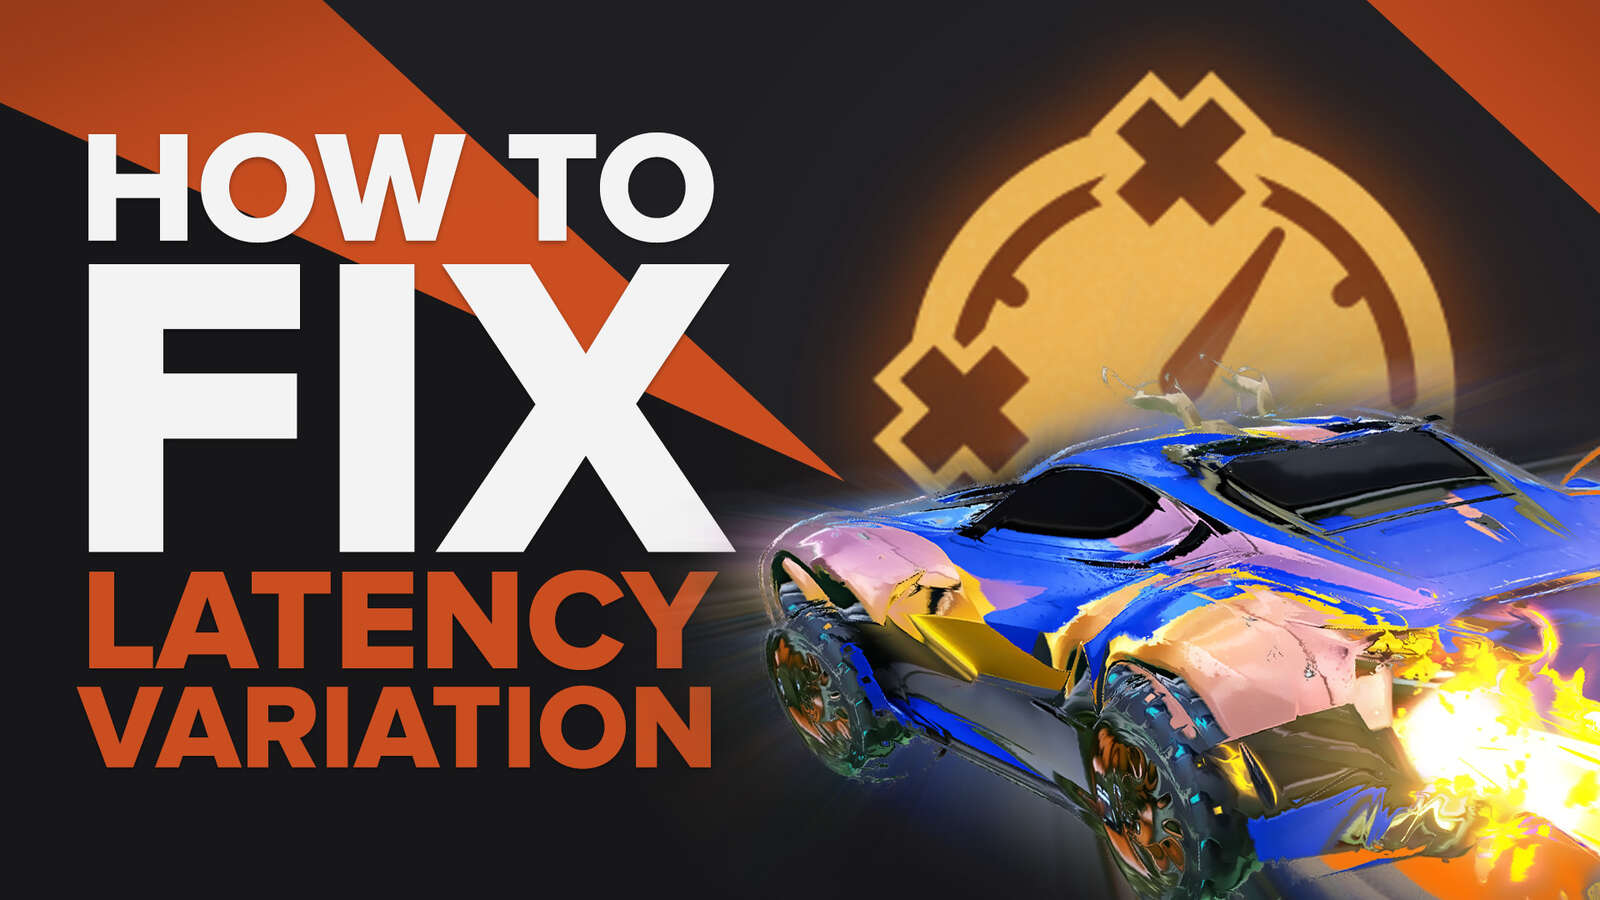 [Solved] How to fix latency variation issues in Rocket League